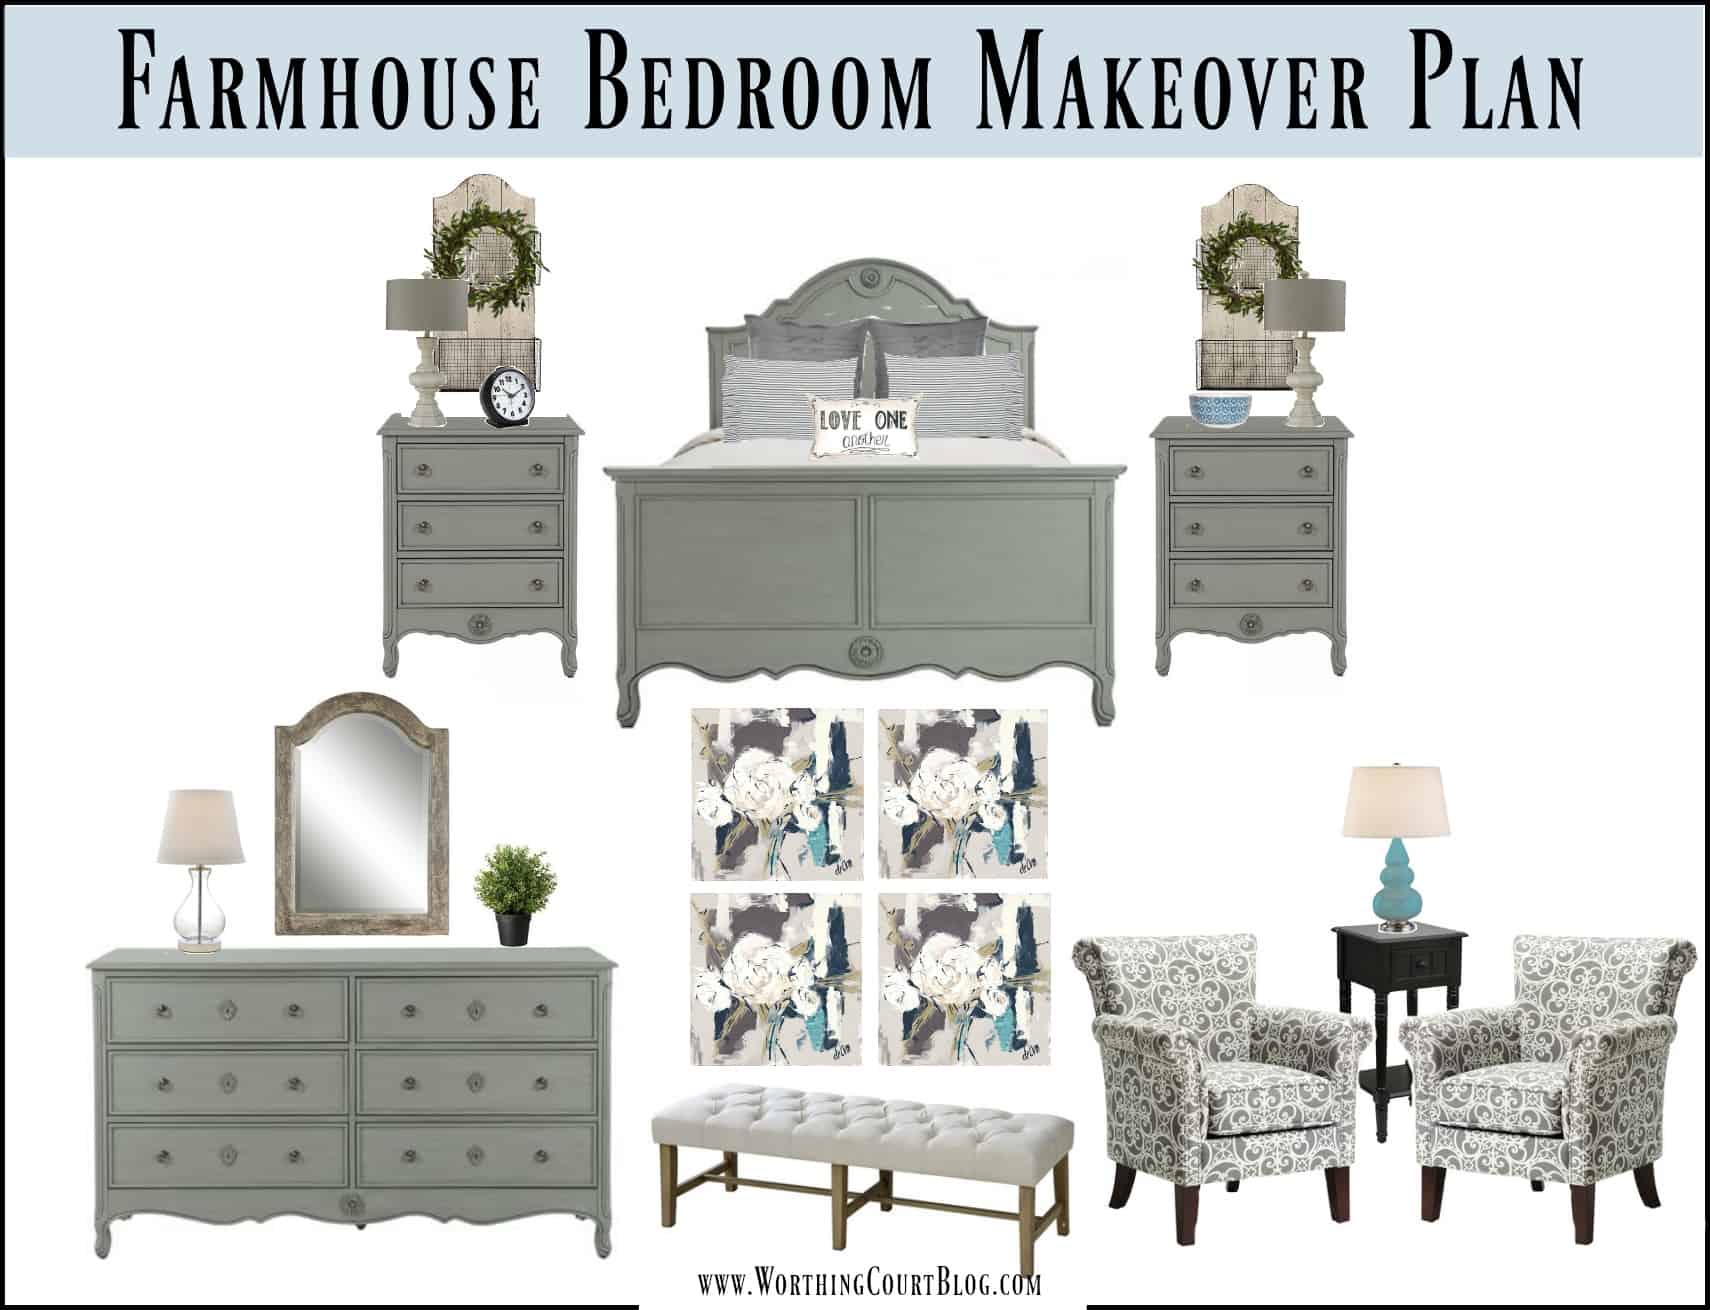 Farmhouse style bedroom makeover plans mood board.